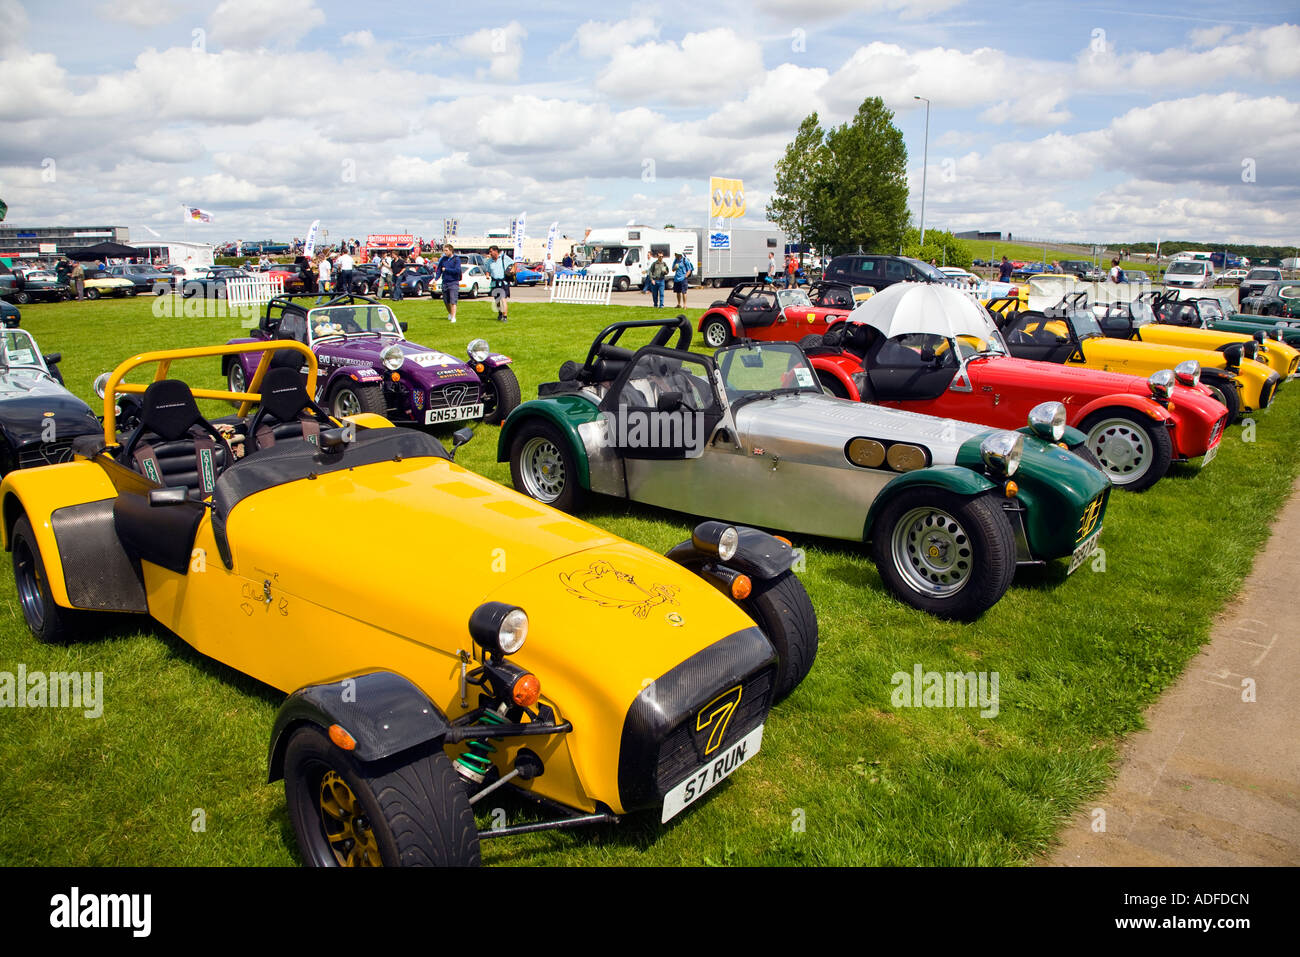 Display of Caterham cars at a classic car show in concourse condition. Silverstone 2007 Stock Photo